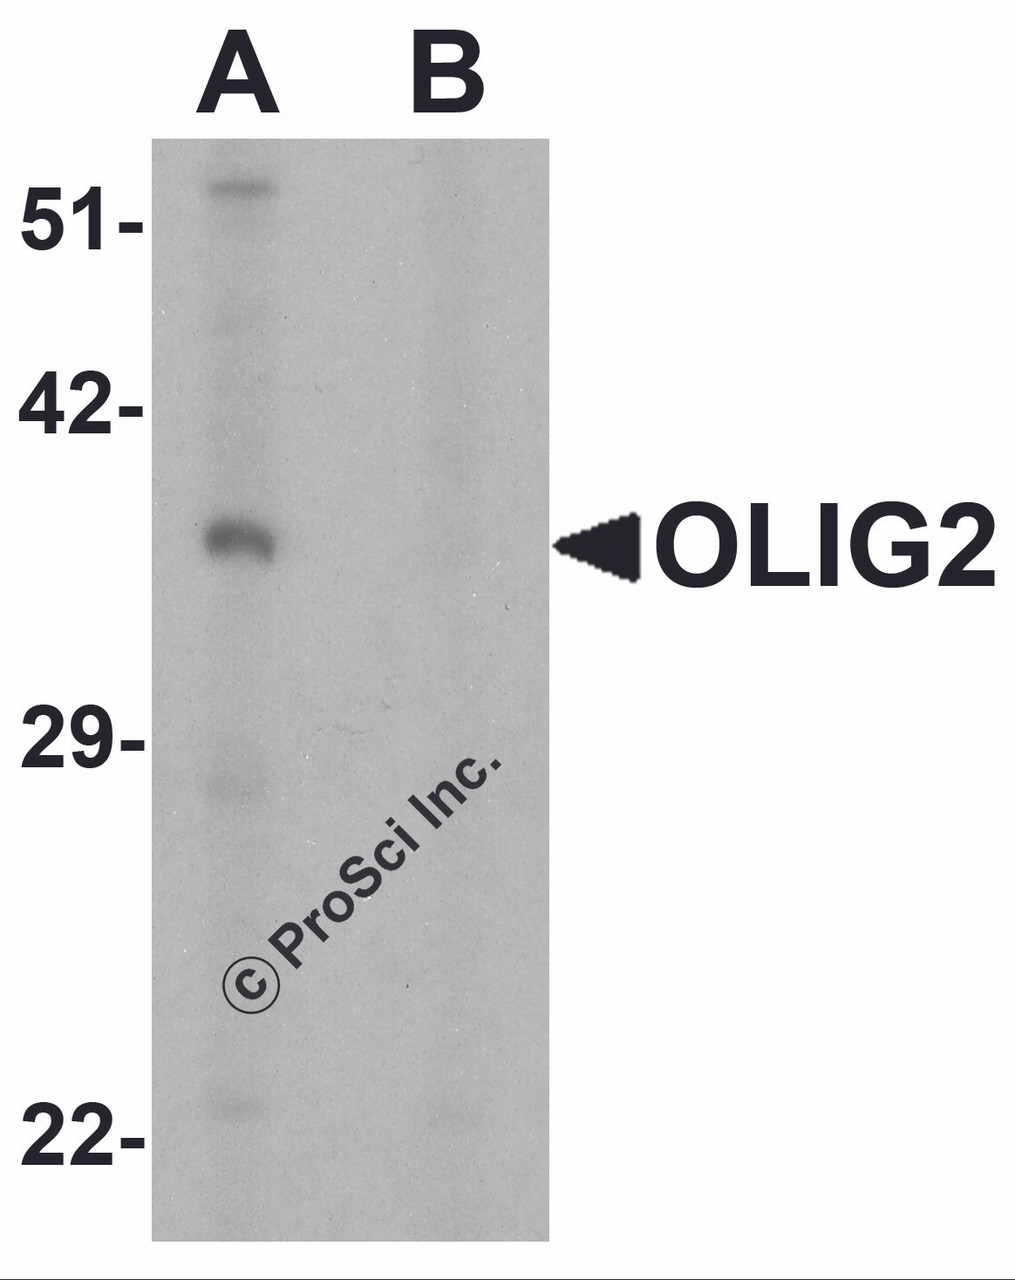 Western blot analysis of OLIG2 in EL4 cell lysate with OLIG2 antibody at 1 &#956;g/ml in (A) the absence and (B) the presence of blocking peptide.